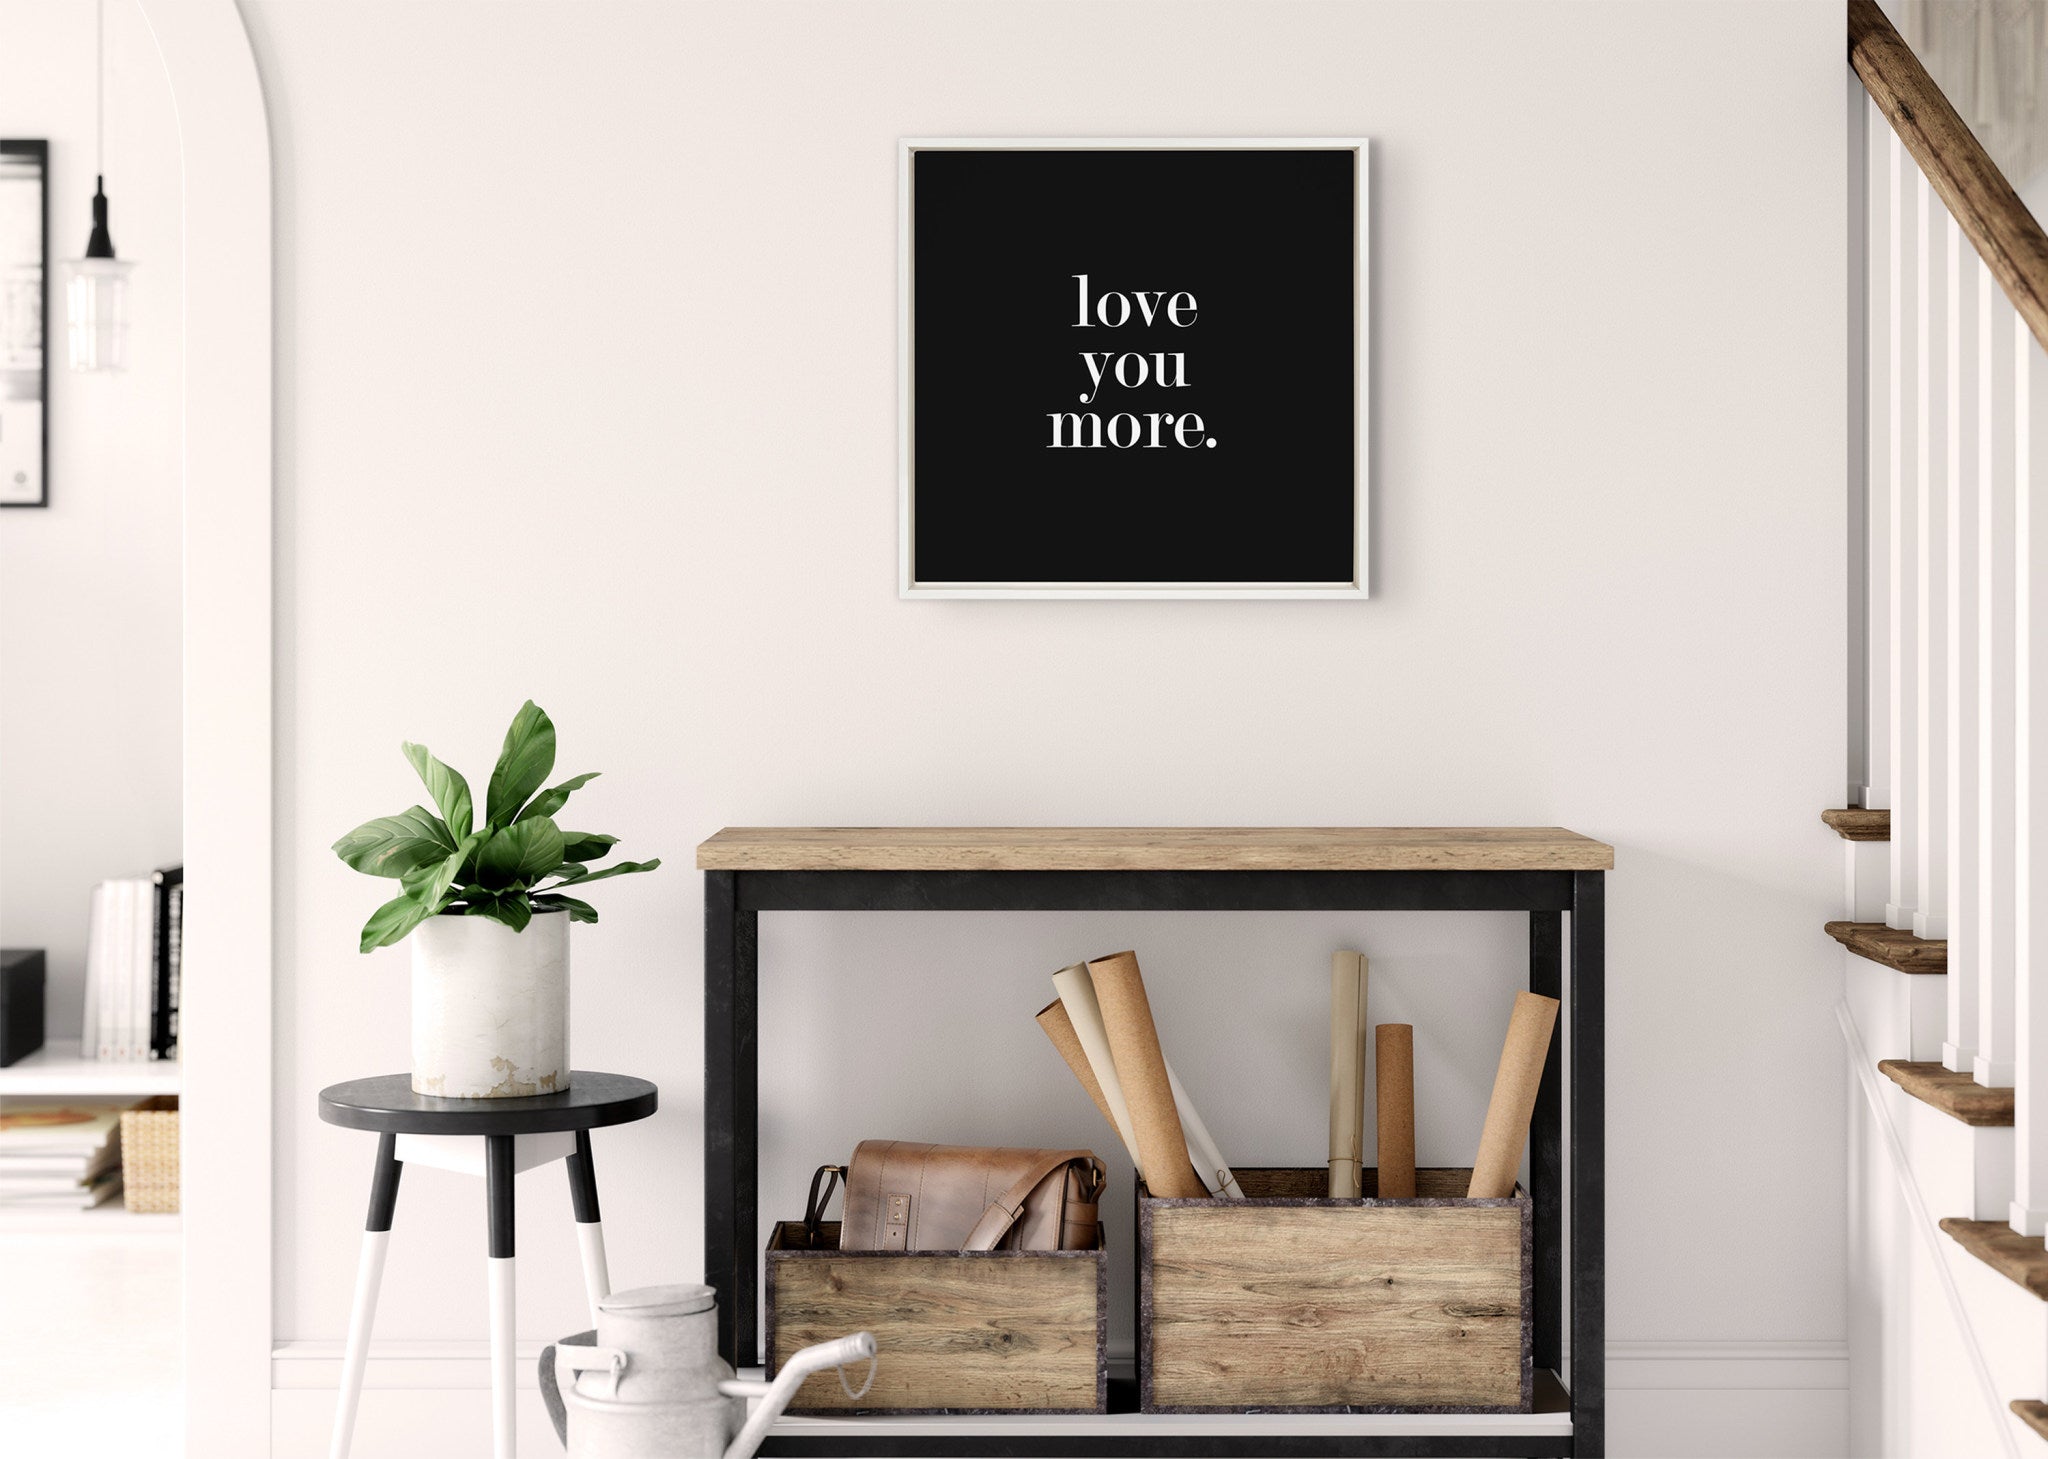 Sylvie Love You More Black Framed Canvas by Maggie Price